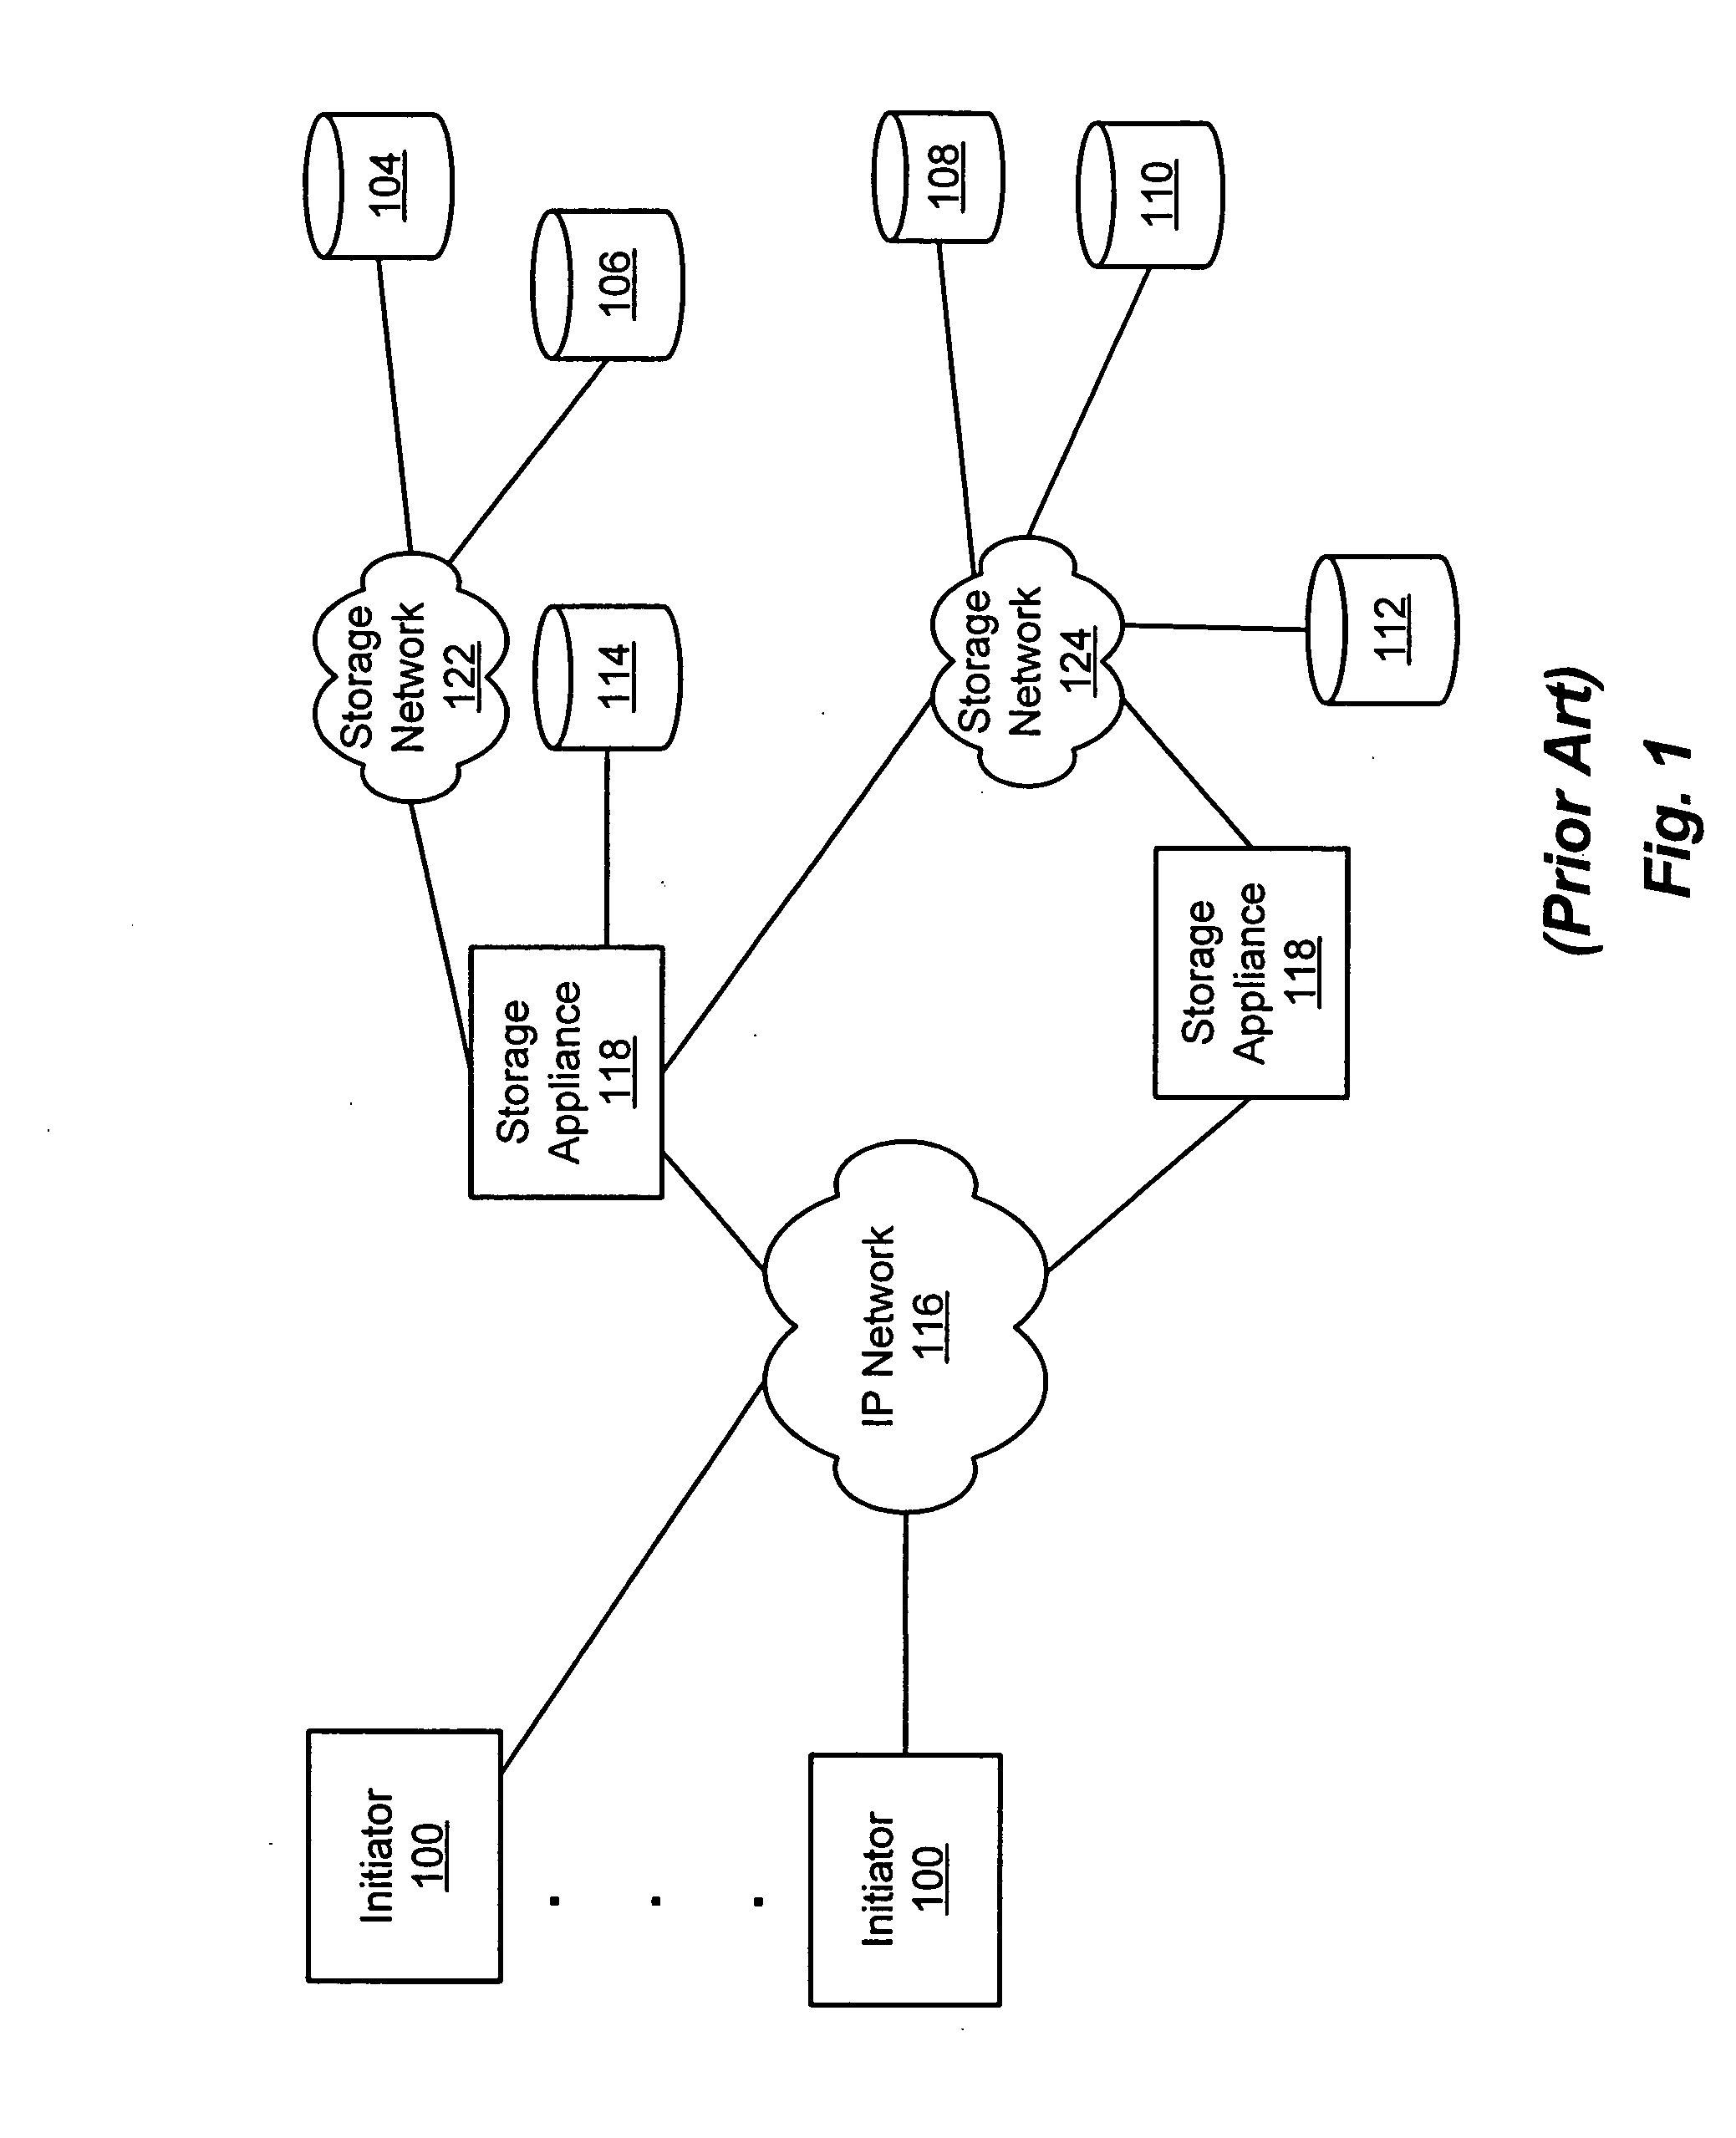 Storage processor for handling disparate requests to transmit in a storage appliance